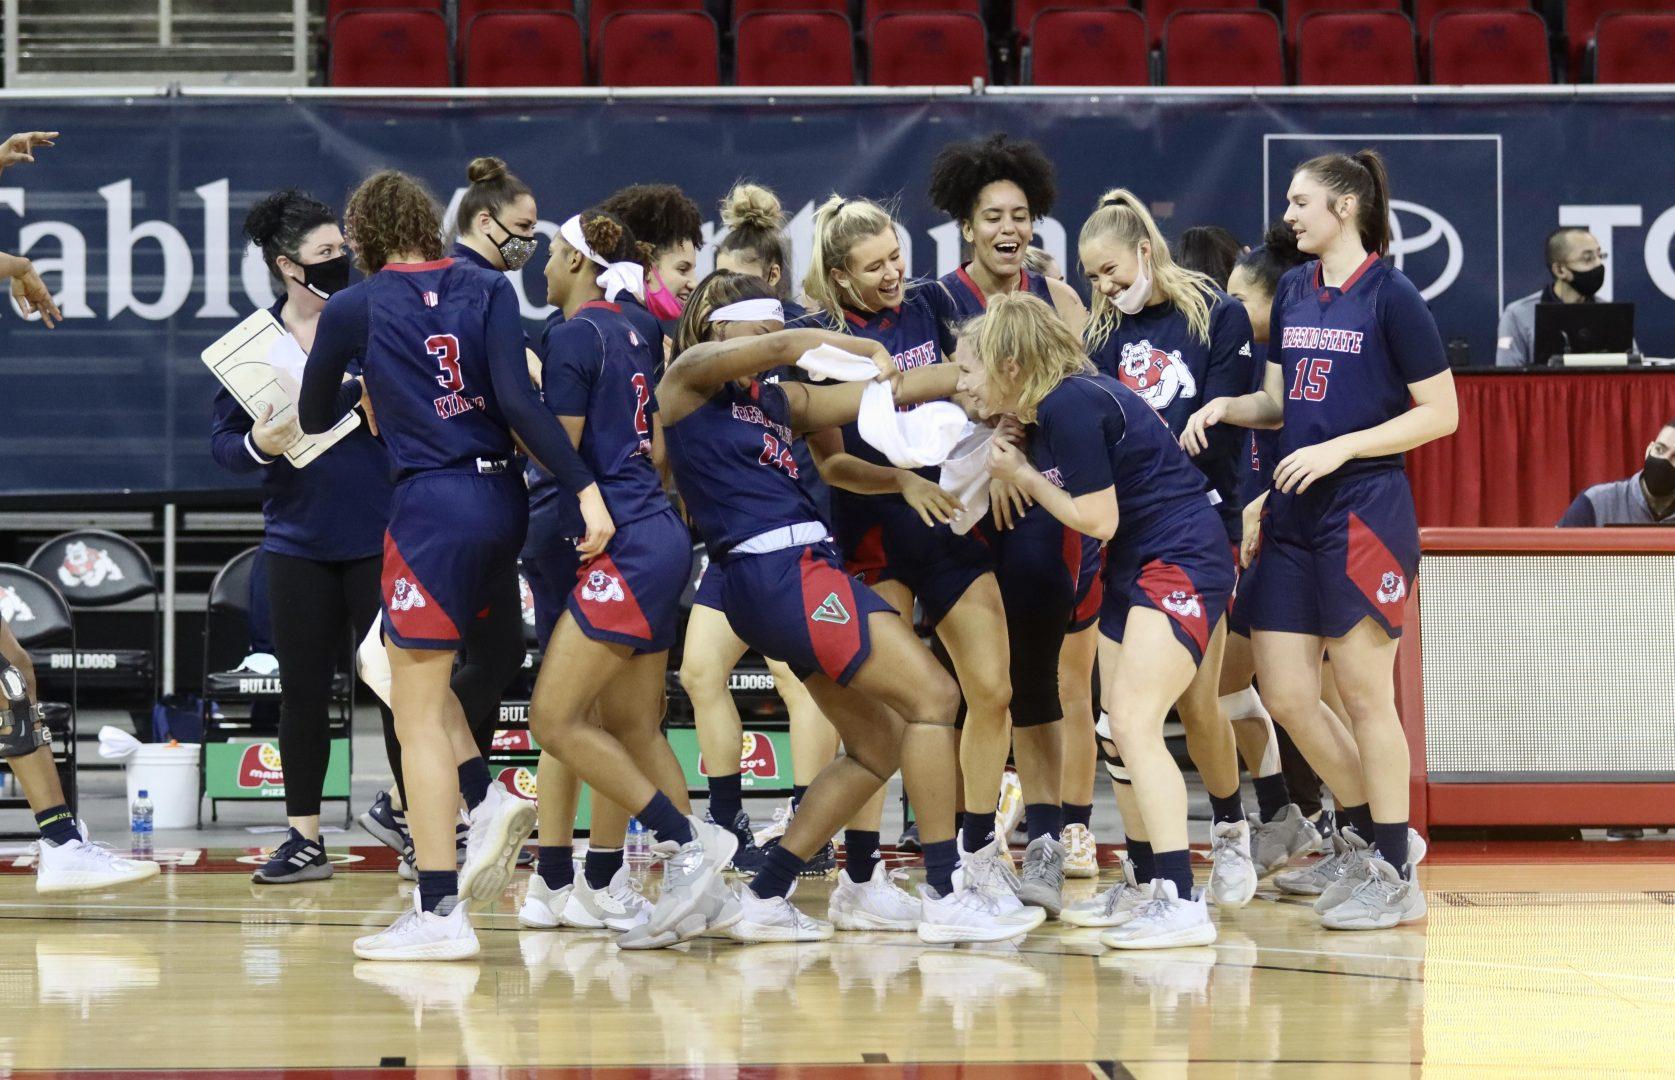 The Bulldogs celebrate after a last second shot at the end of the third quarter by senior guard Bree Delaney (20), in the game against Boise State on Thursday, Jan. 21, 2021, at the Save Mart Center. (Kameron Thorn/ The Collegian)